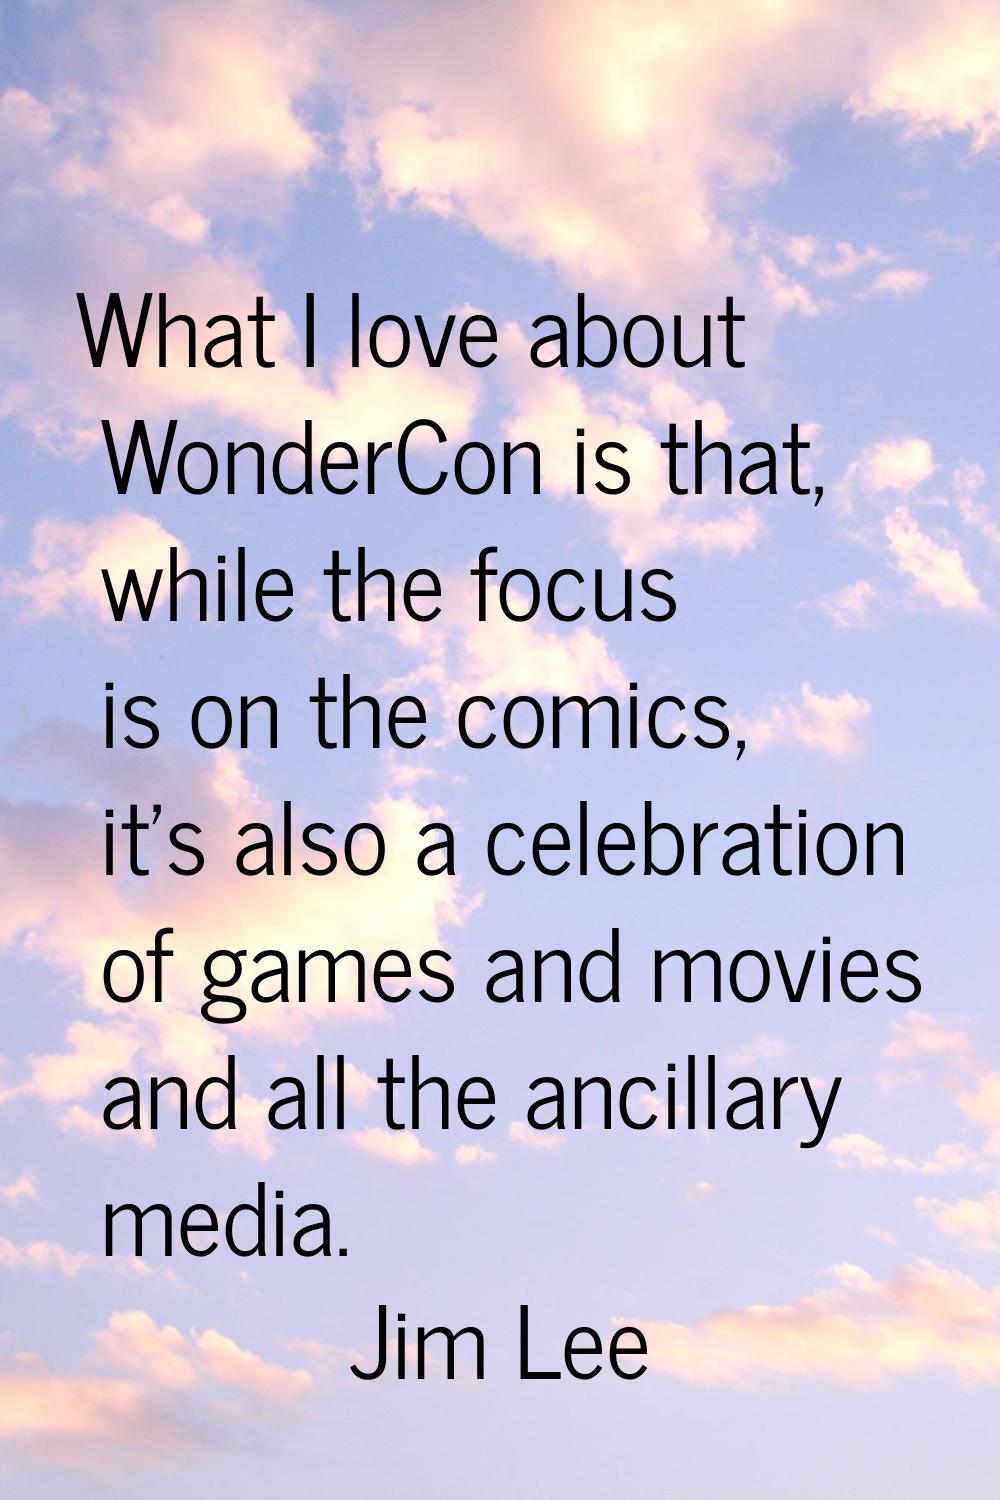 What I love about WonderCon is that, while the focus is on the comics, it's also a celebration of g